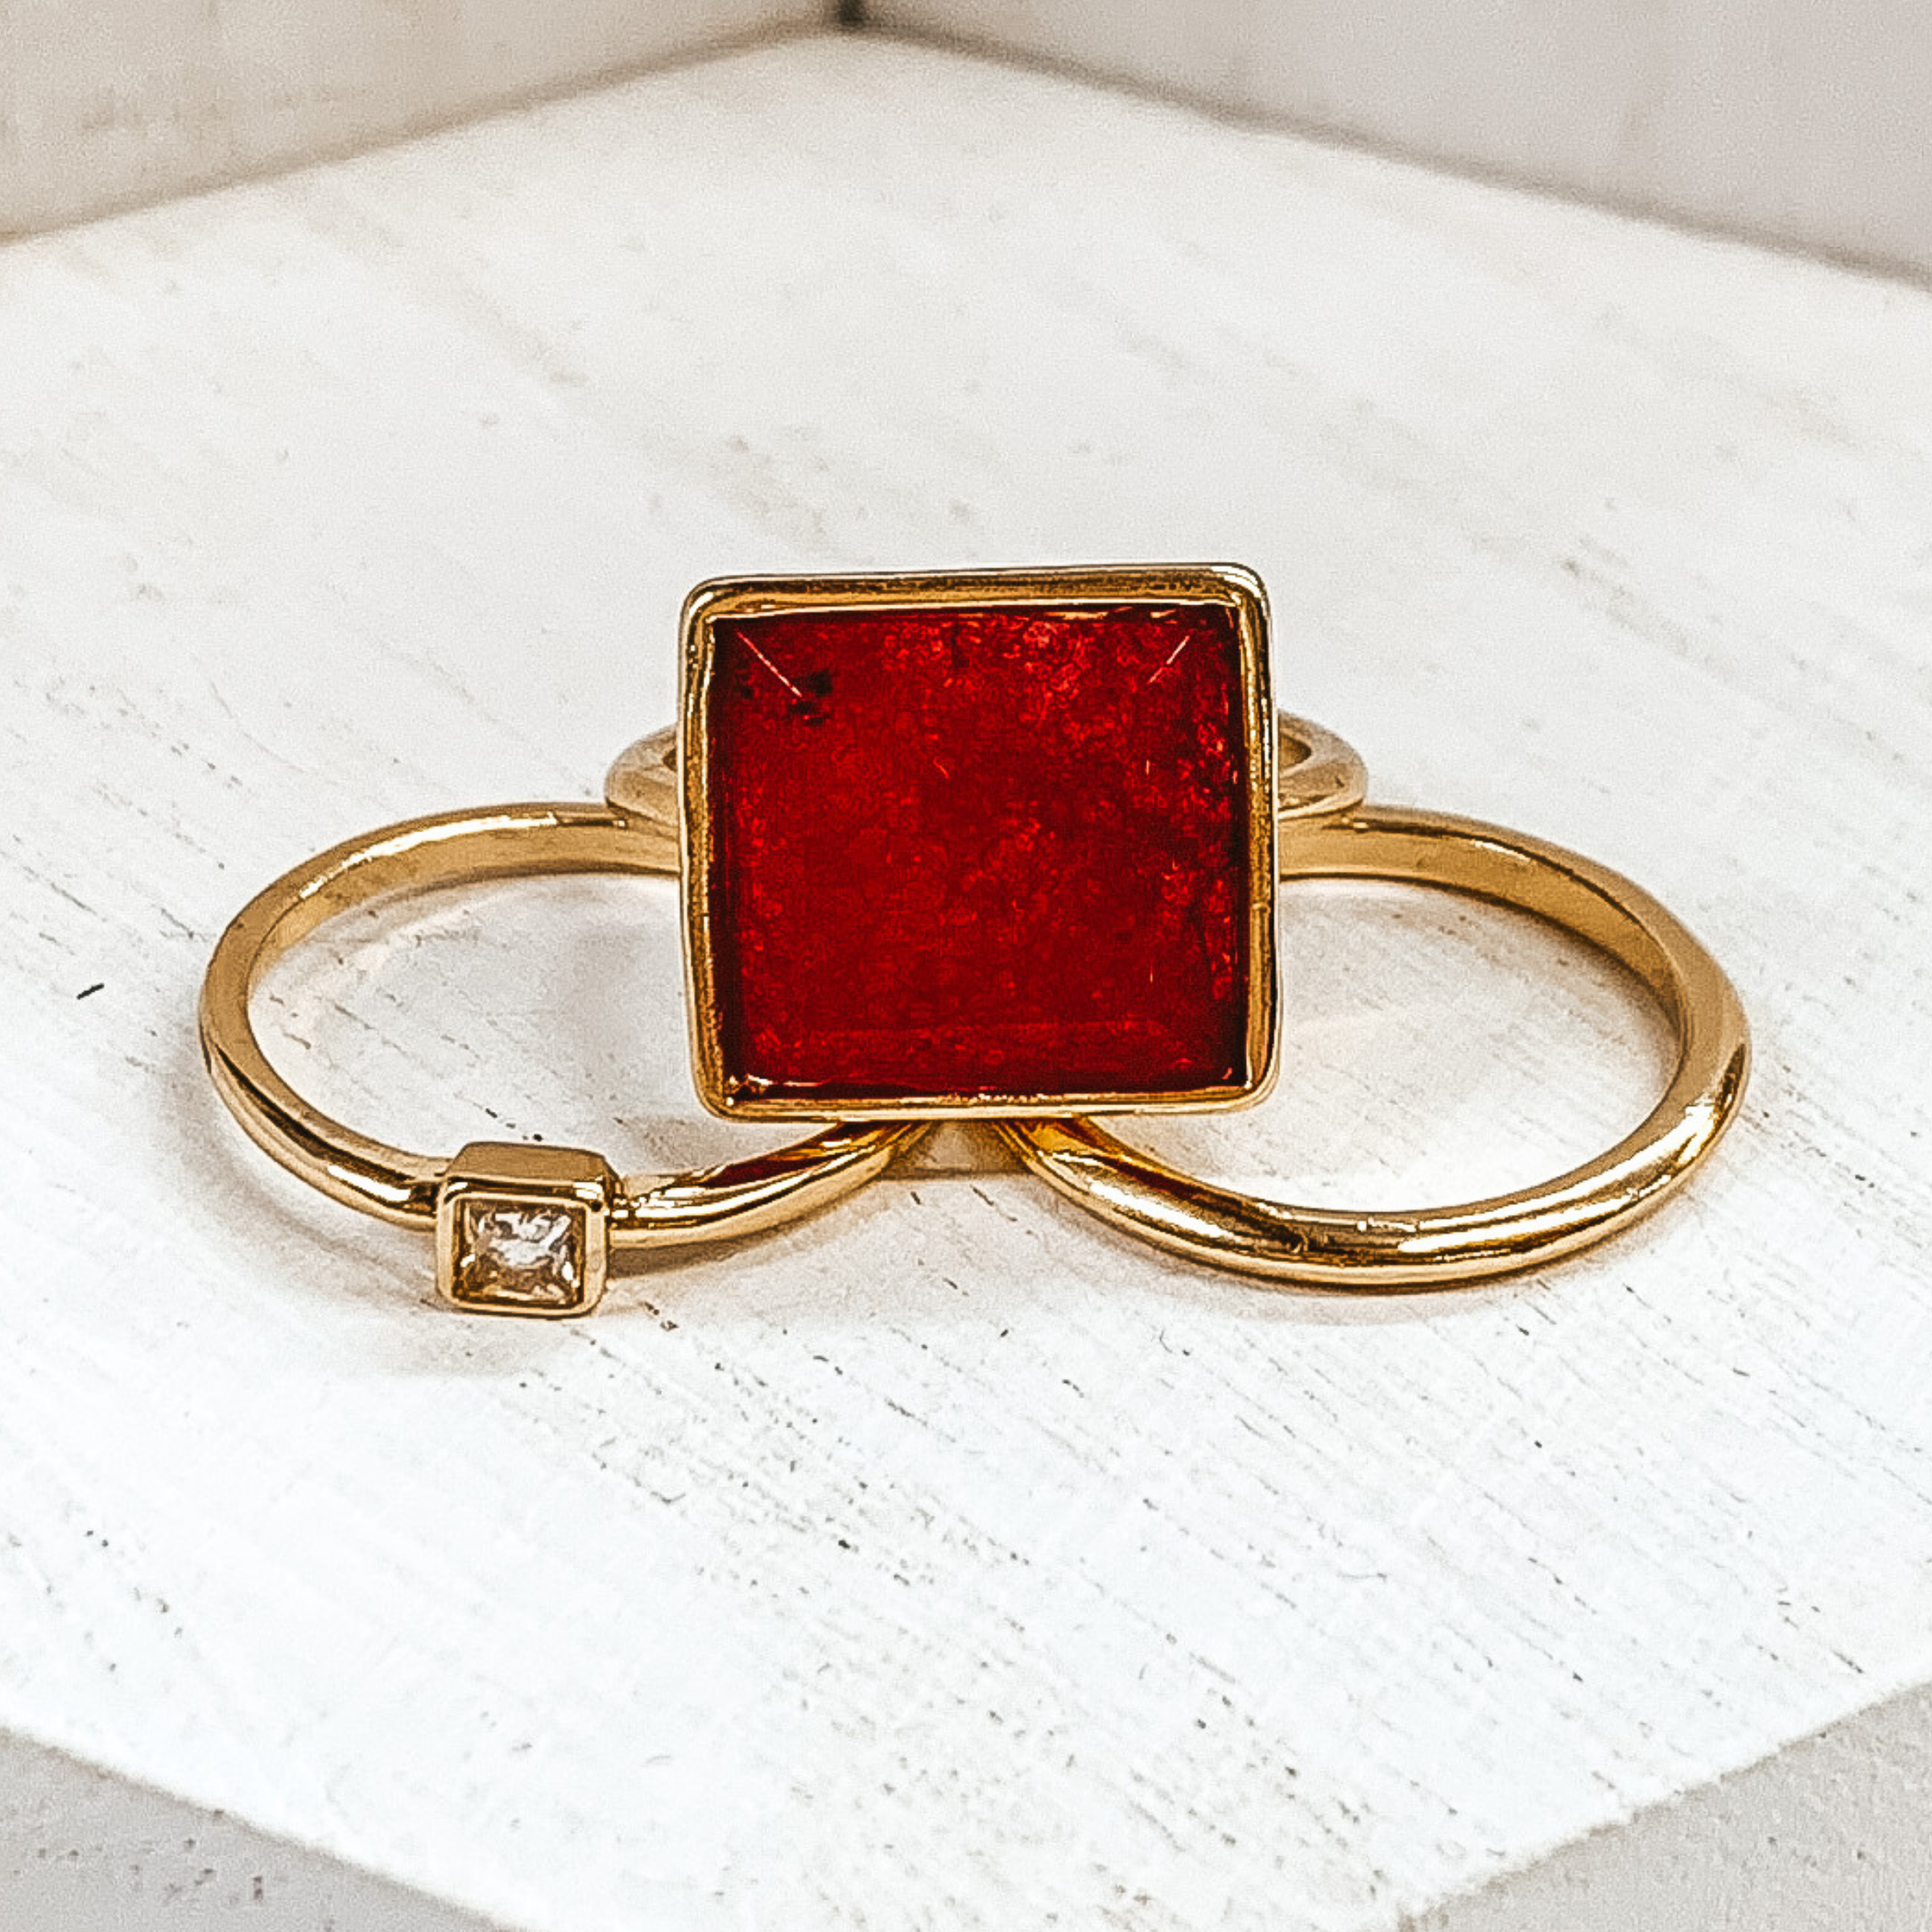 Set of three gold rings. One ring is a plain gold band. Another has a small square pendant with a center crystal. The third ring has a big, maroon pendant. These rings are pitured on a white background.  